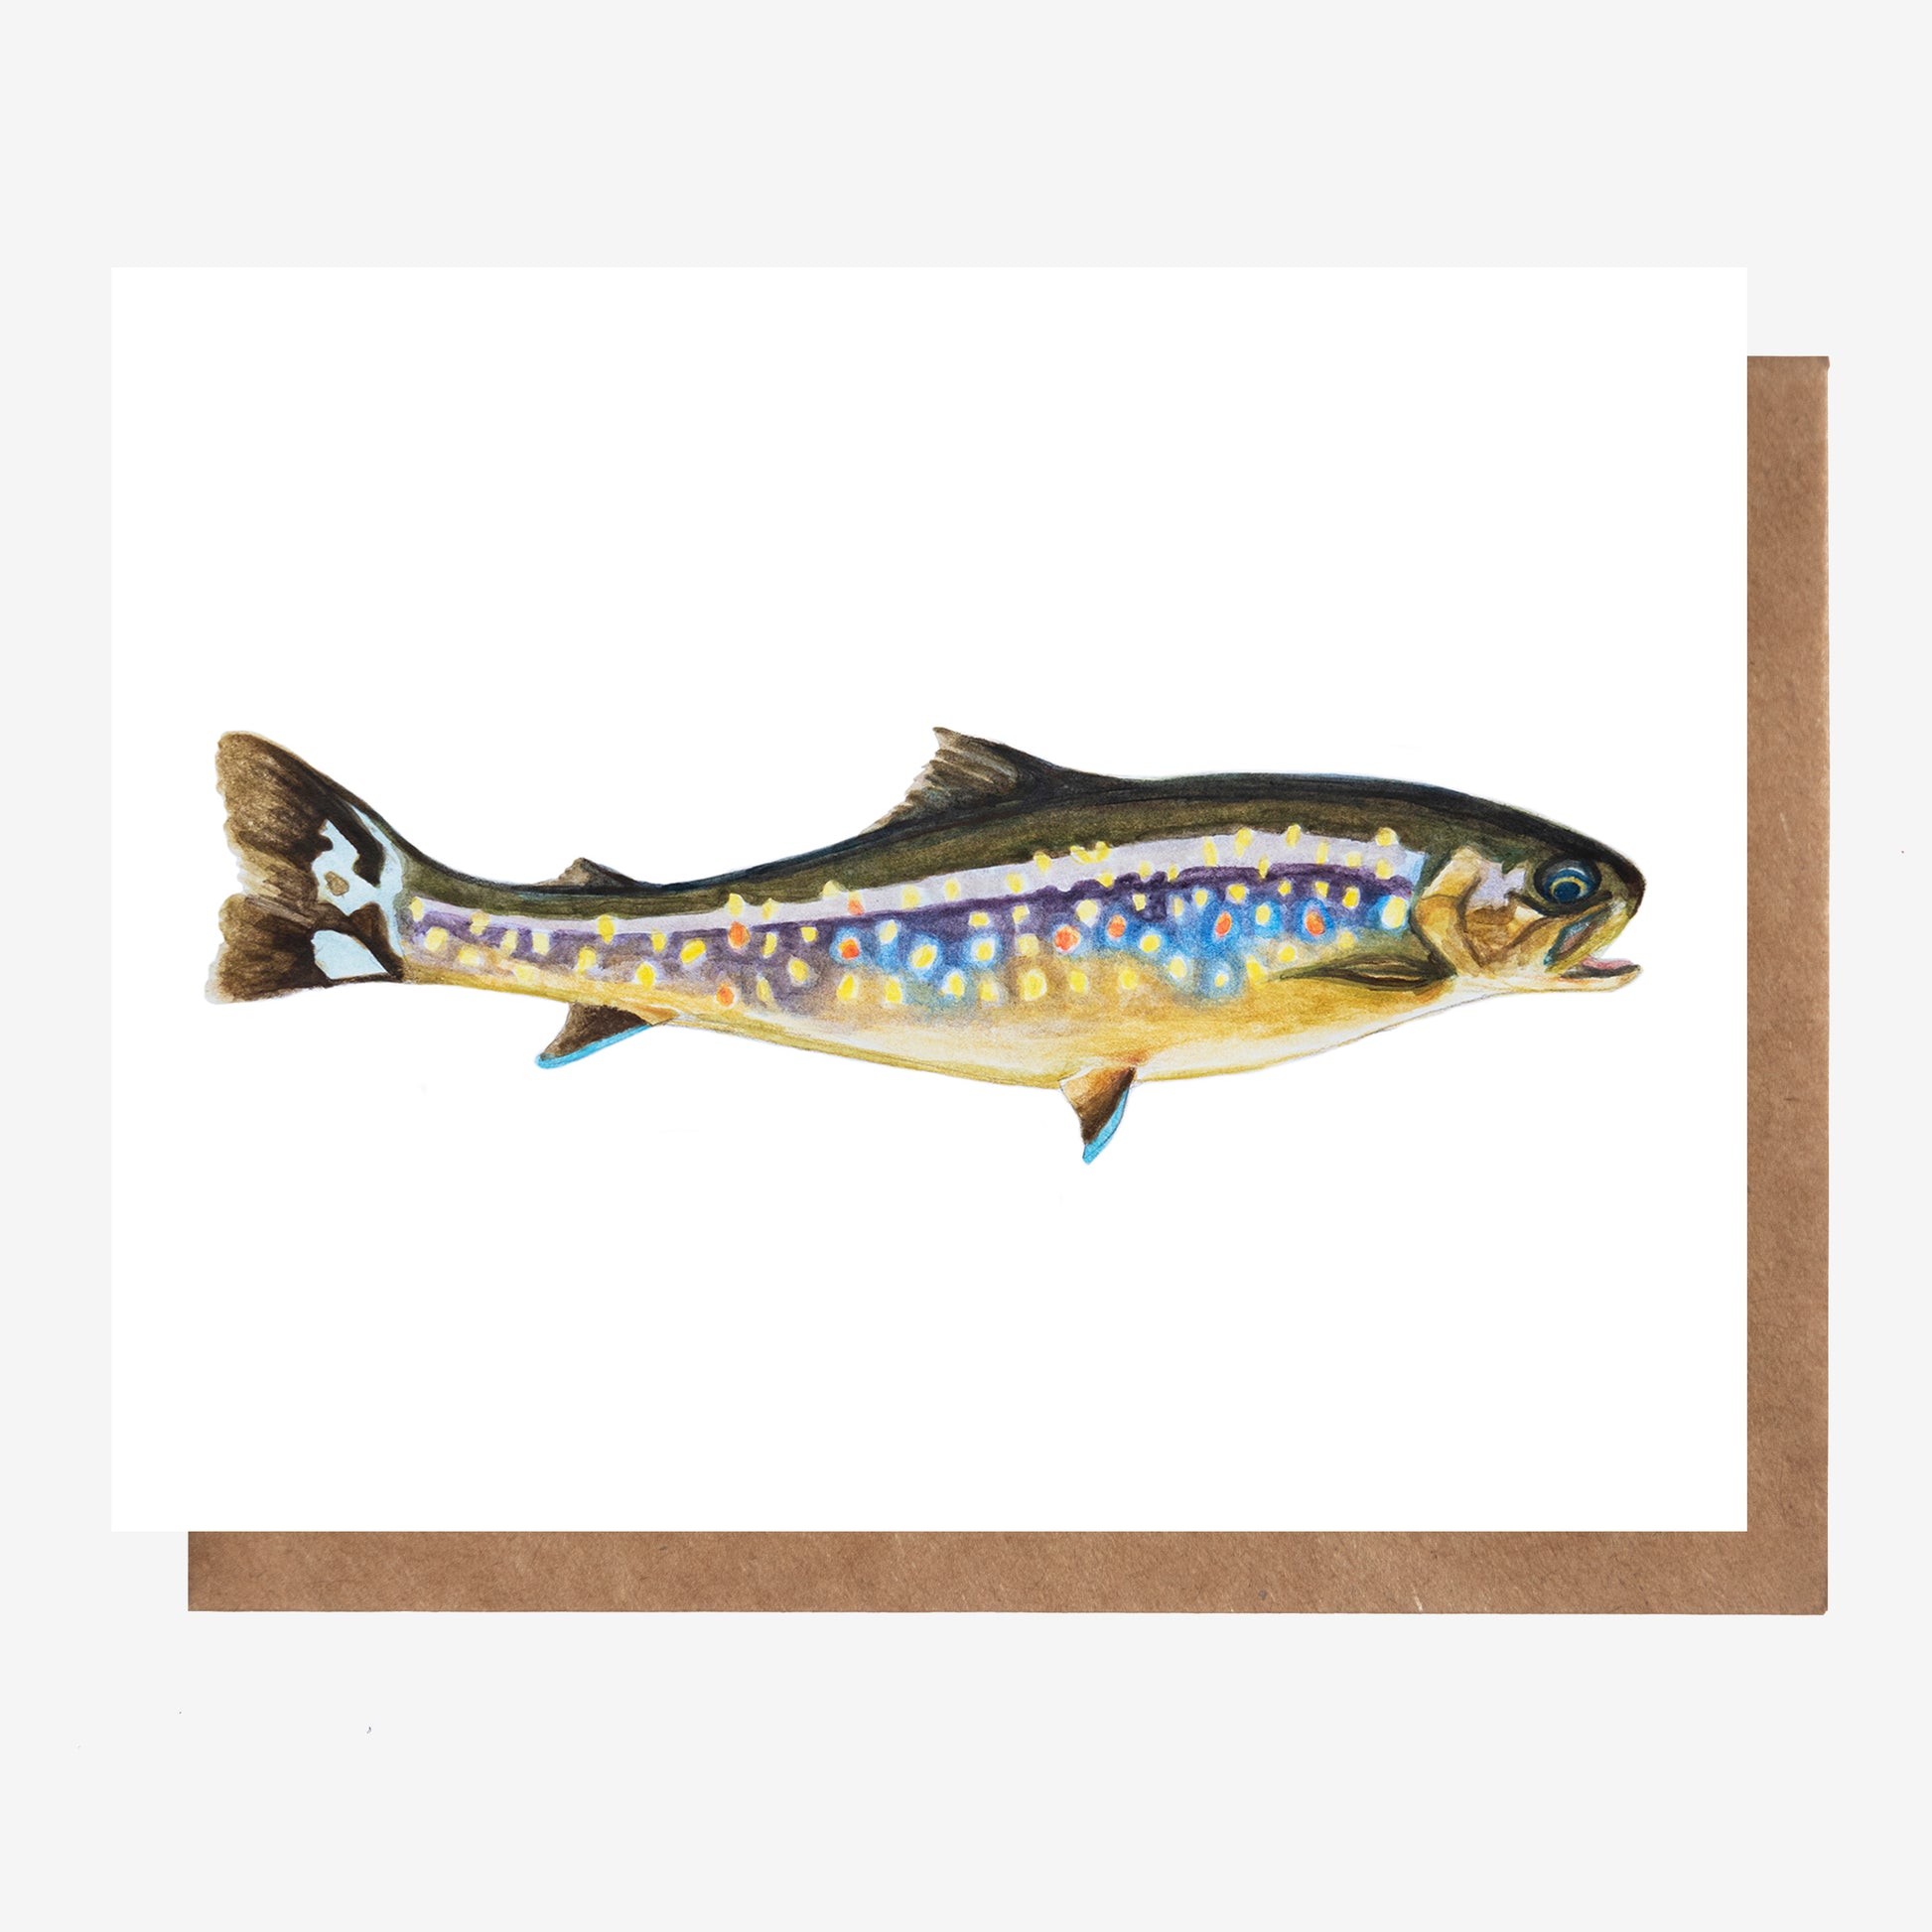 Hand drawn wild brook trout greeting card for all occasions, made in Nova Scotia, Canada by Coastal Card Co.